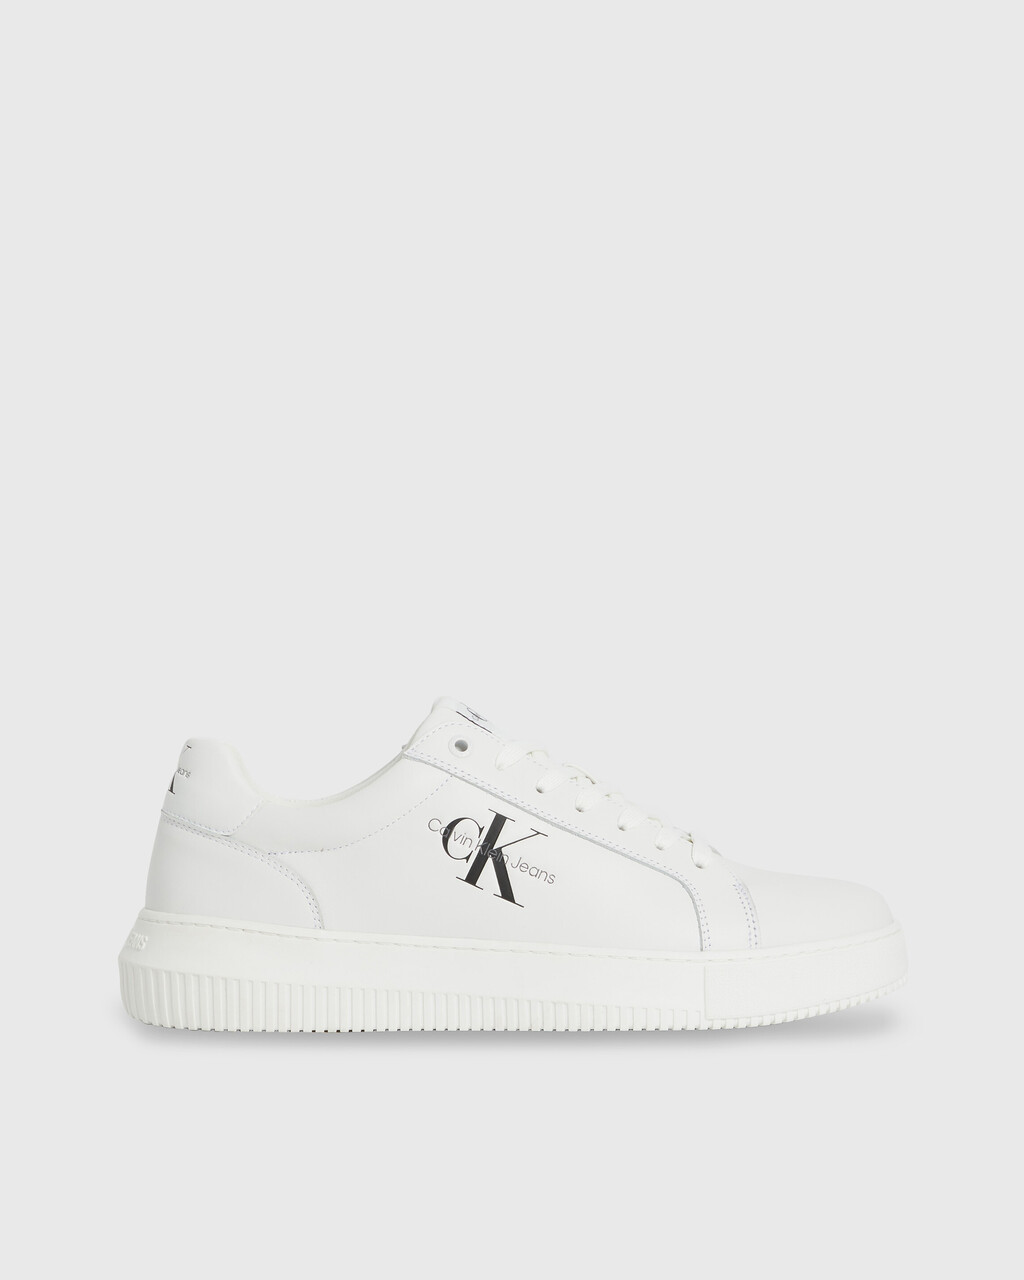 LEATHER TRAINERS, White/Black, hi-res